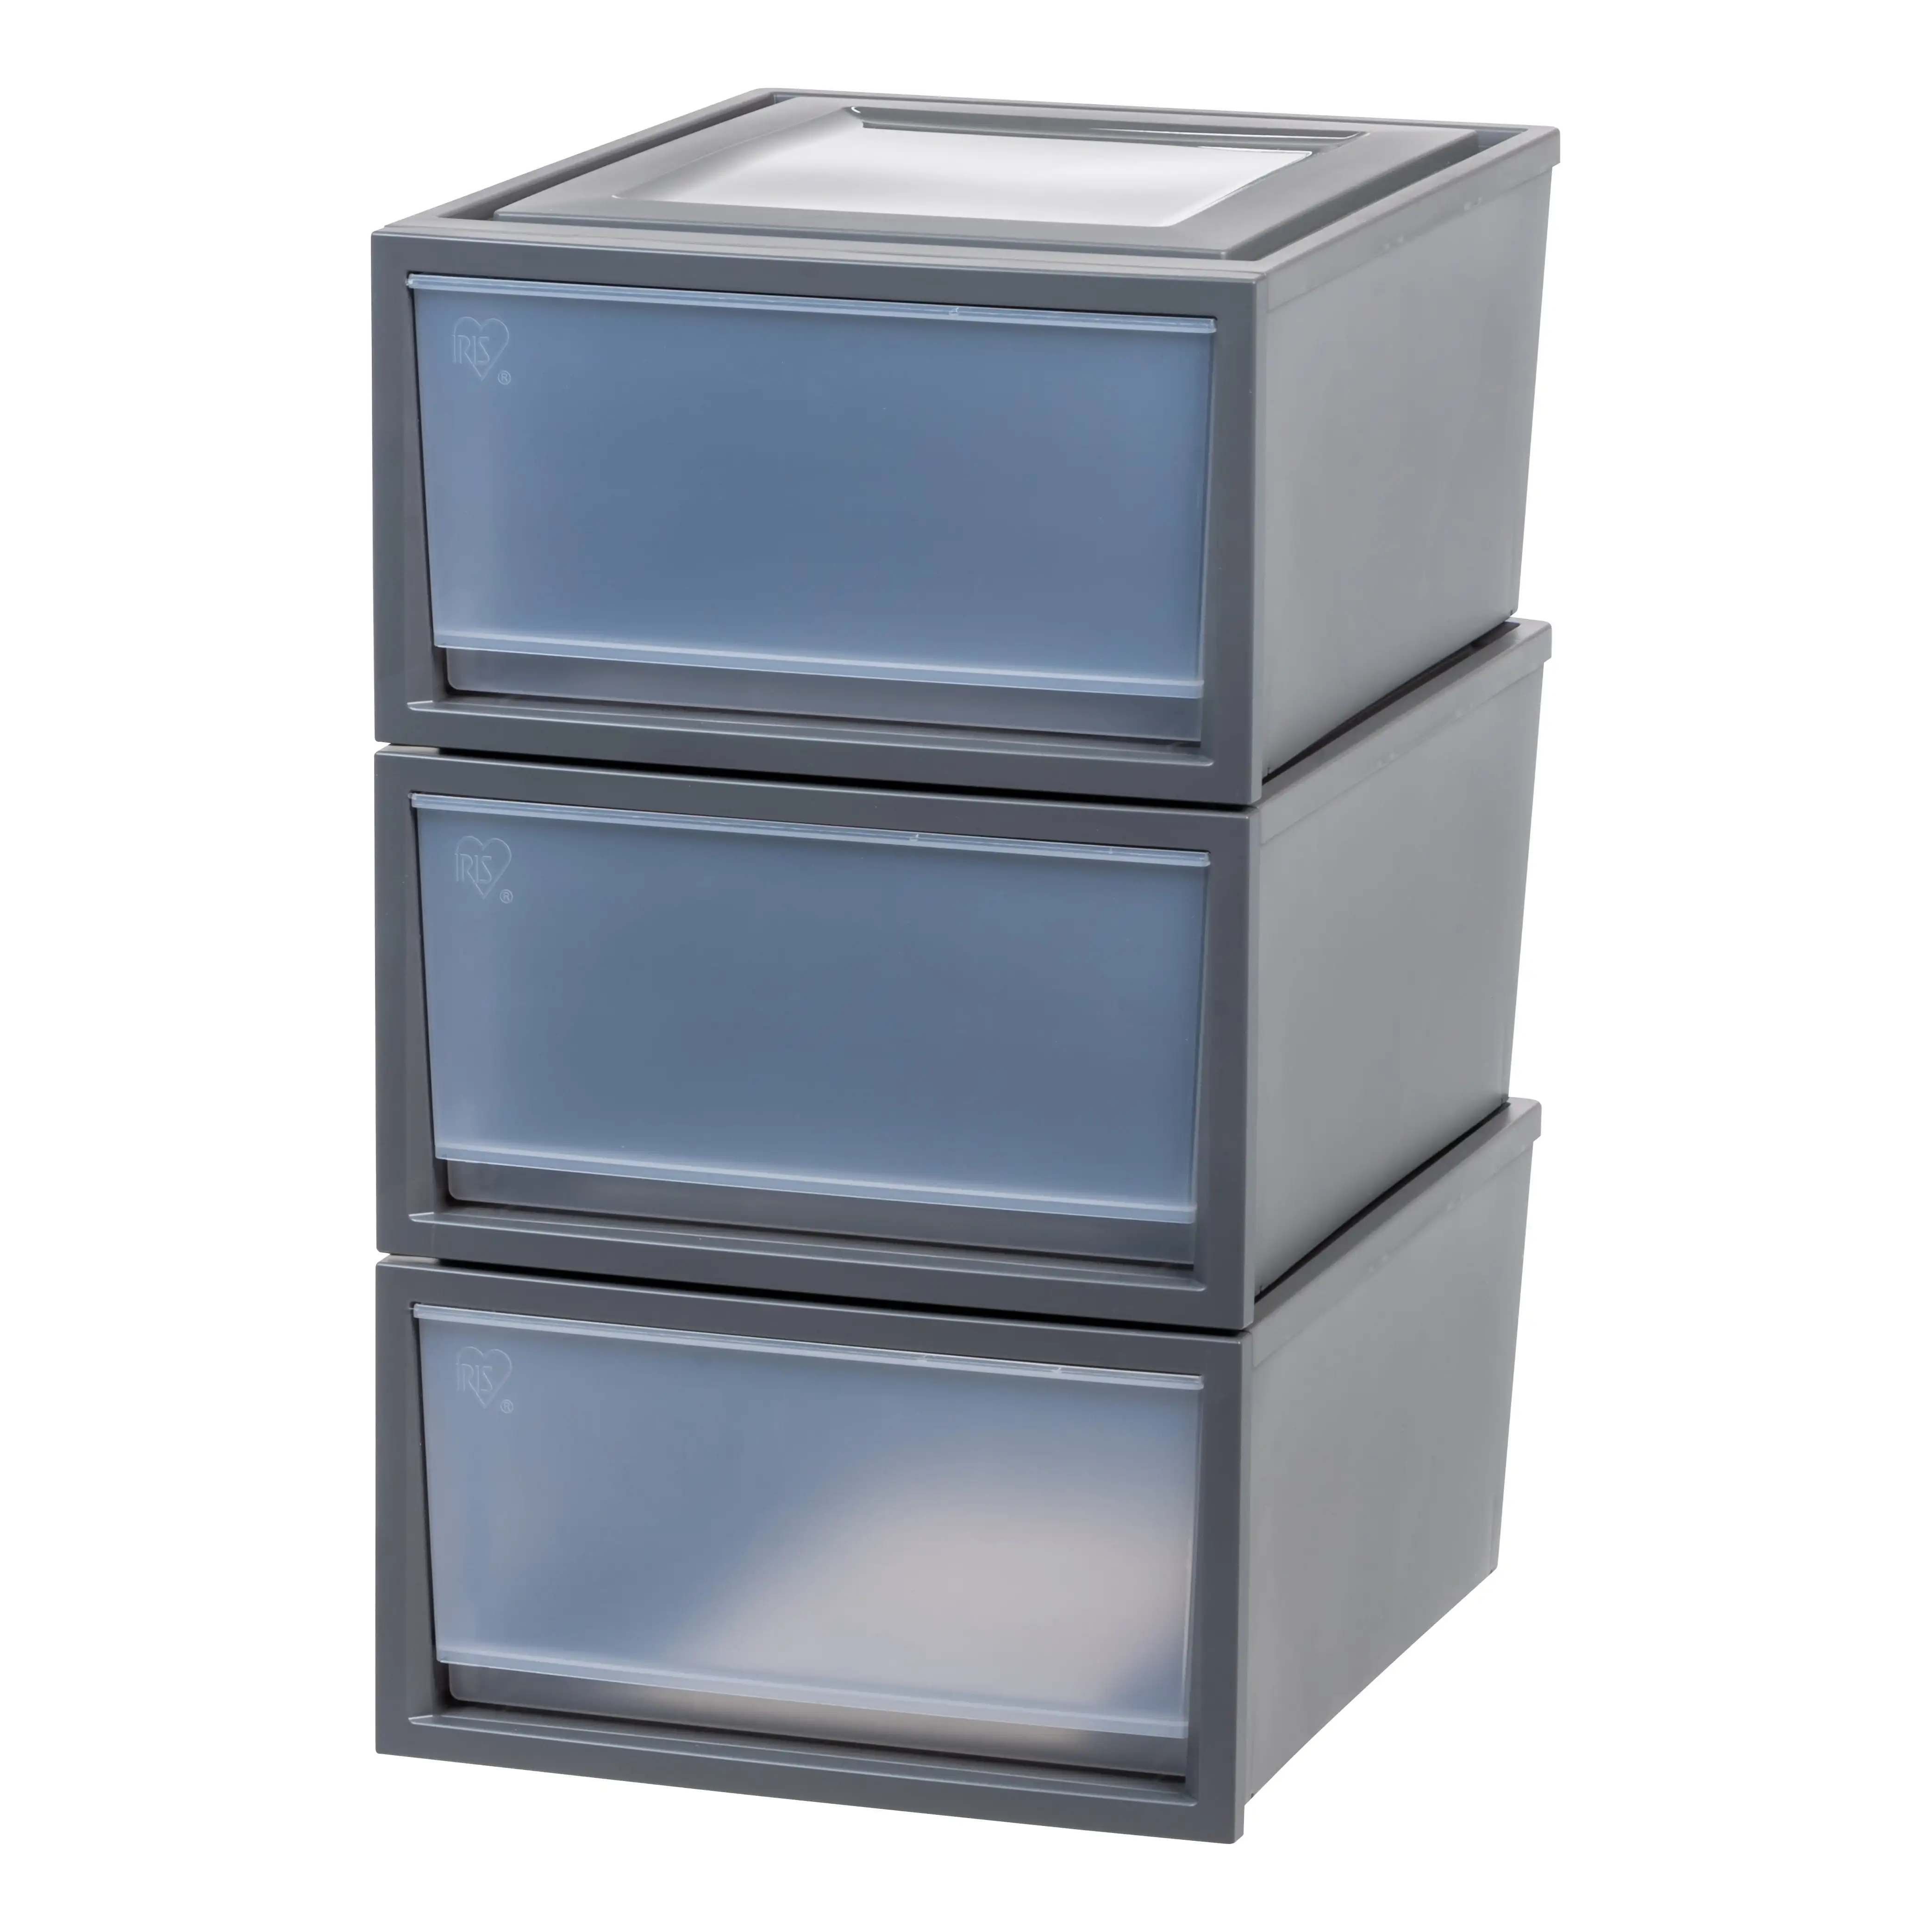 

Plastic Stacking Box Storage Chest with Pullout Drawers, Gray, Set of 3 under desk drawer